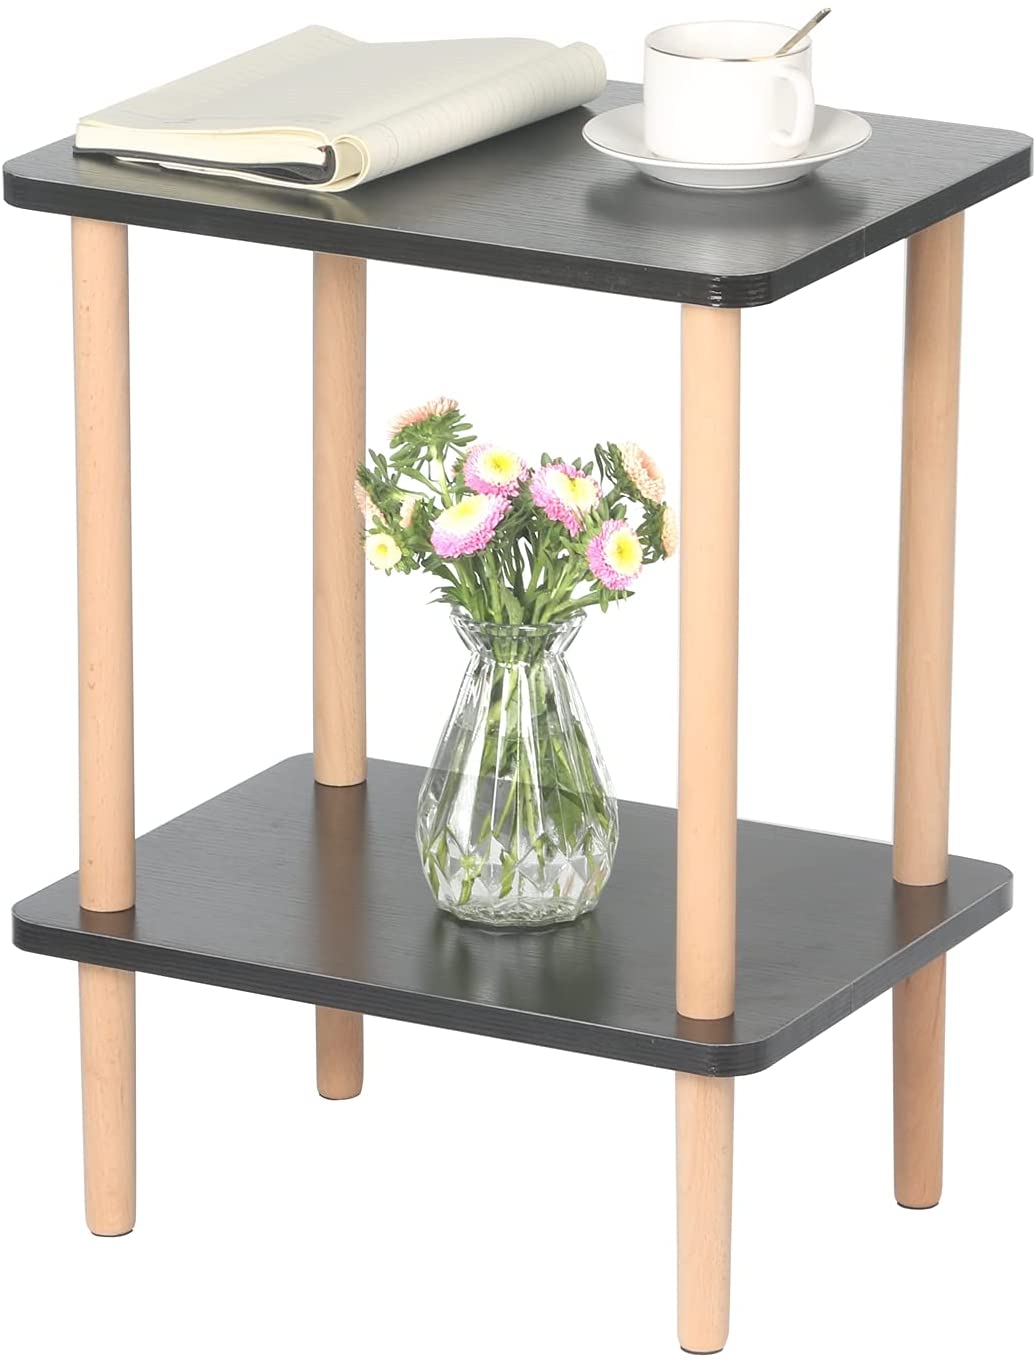 Side Tables : Tier Side Table Tall End Table with Storage Rack Wooden Nightstand